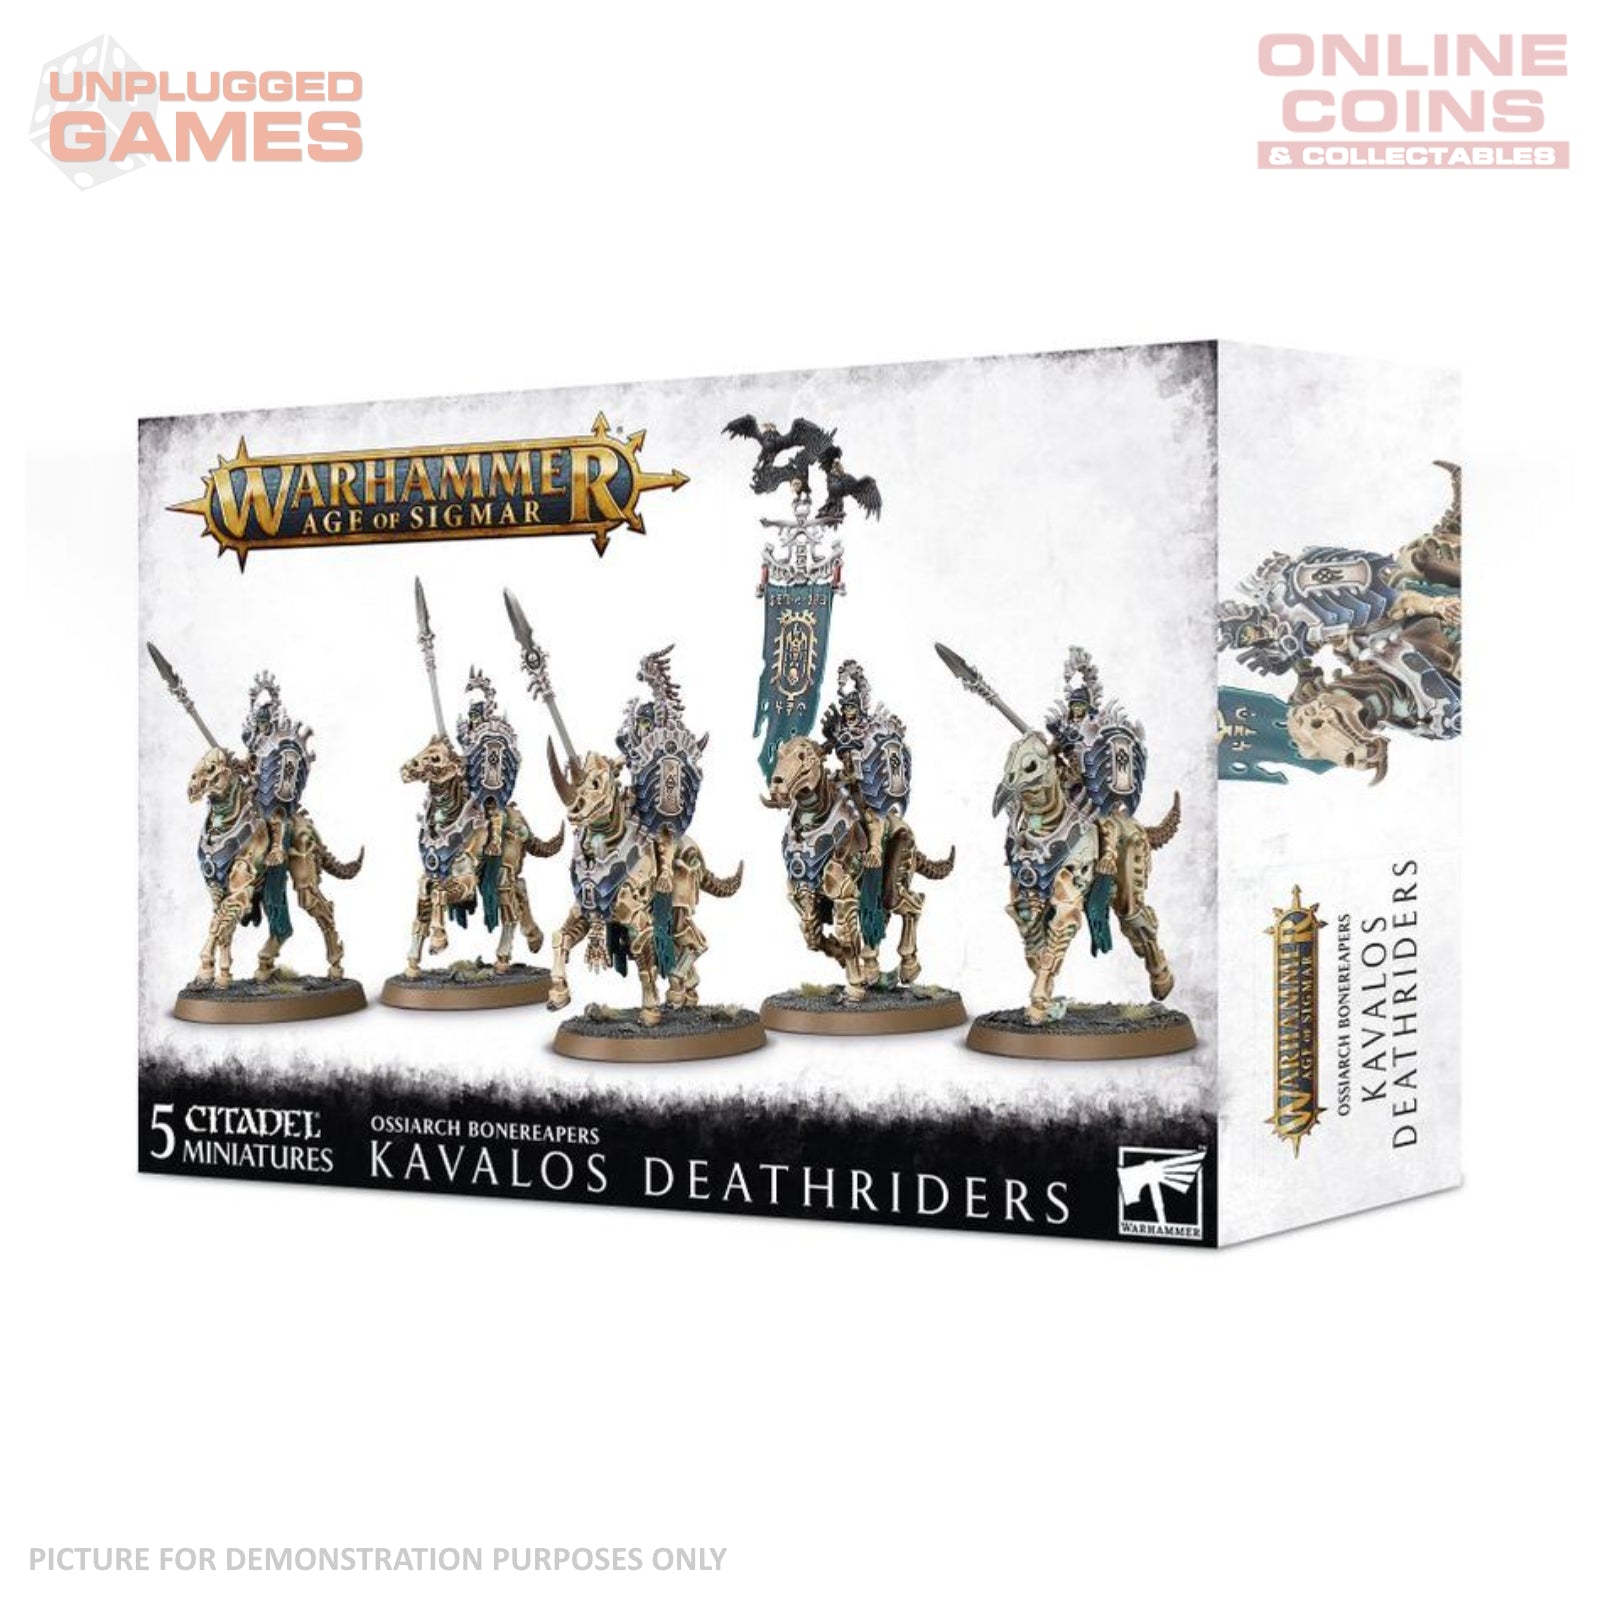 Warhammer Age of Sigmar - Ossiarch Bonereapers Kavalos Deathriders